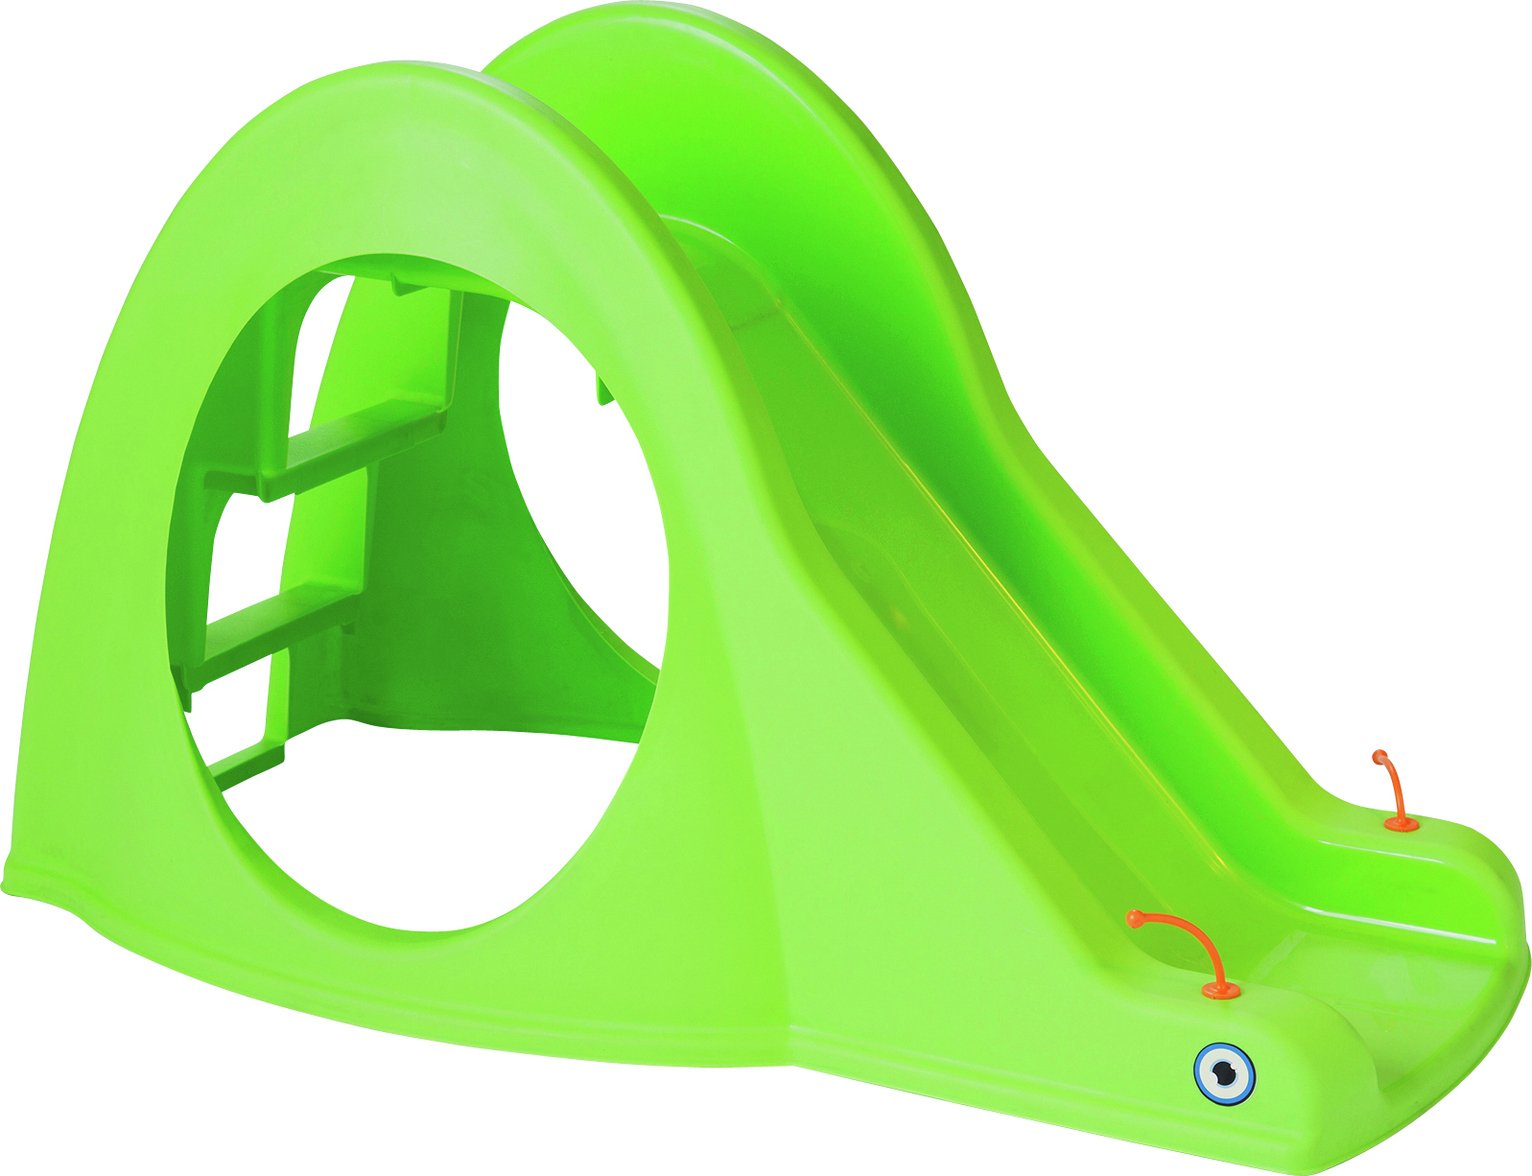 Chad Valley 3ft Bug Toddler Slide review